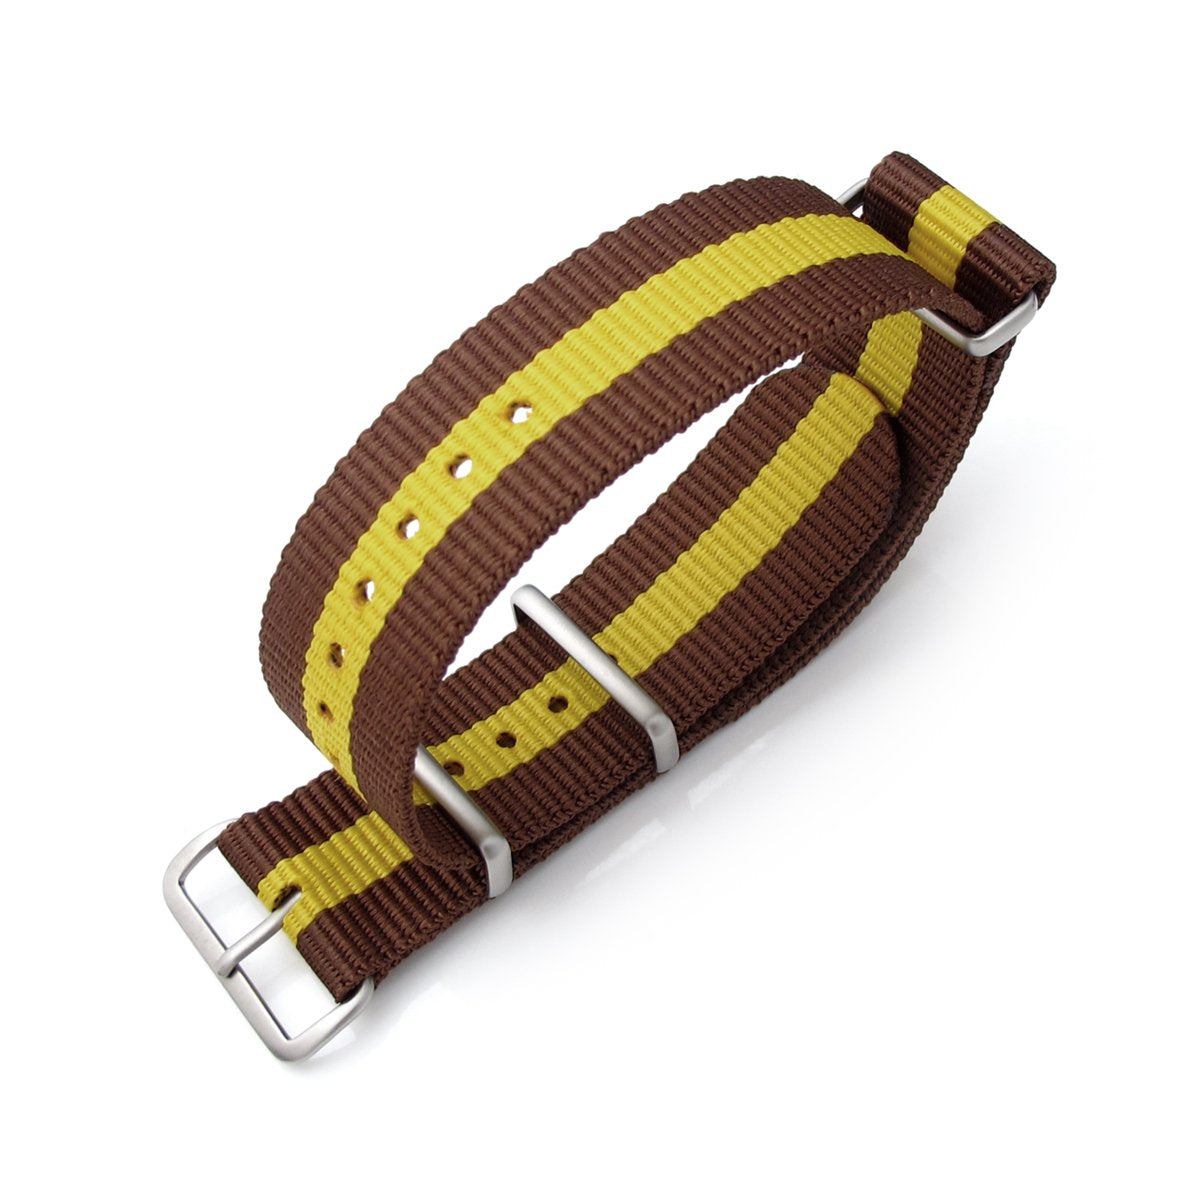 MiLTAT 20mm 22mm or 24mm G10 NATO Military Watch Strap Ballistic Nylon Armband Brushed Brown &amp; Yellow Strapcode Watch Bands